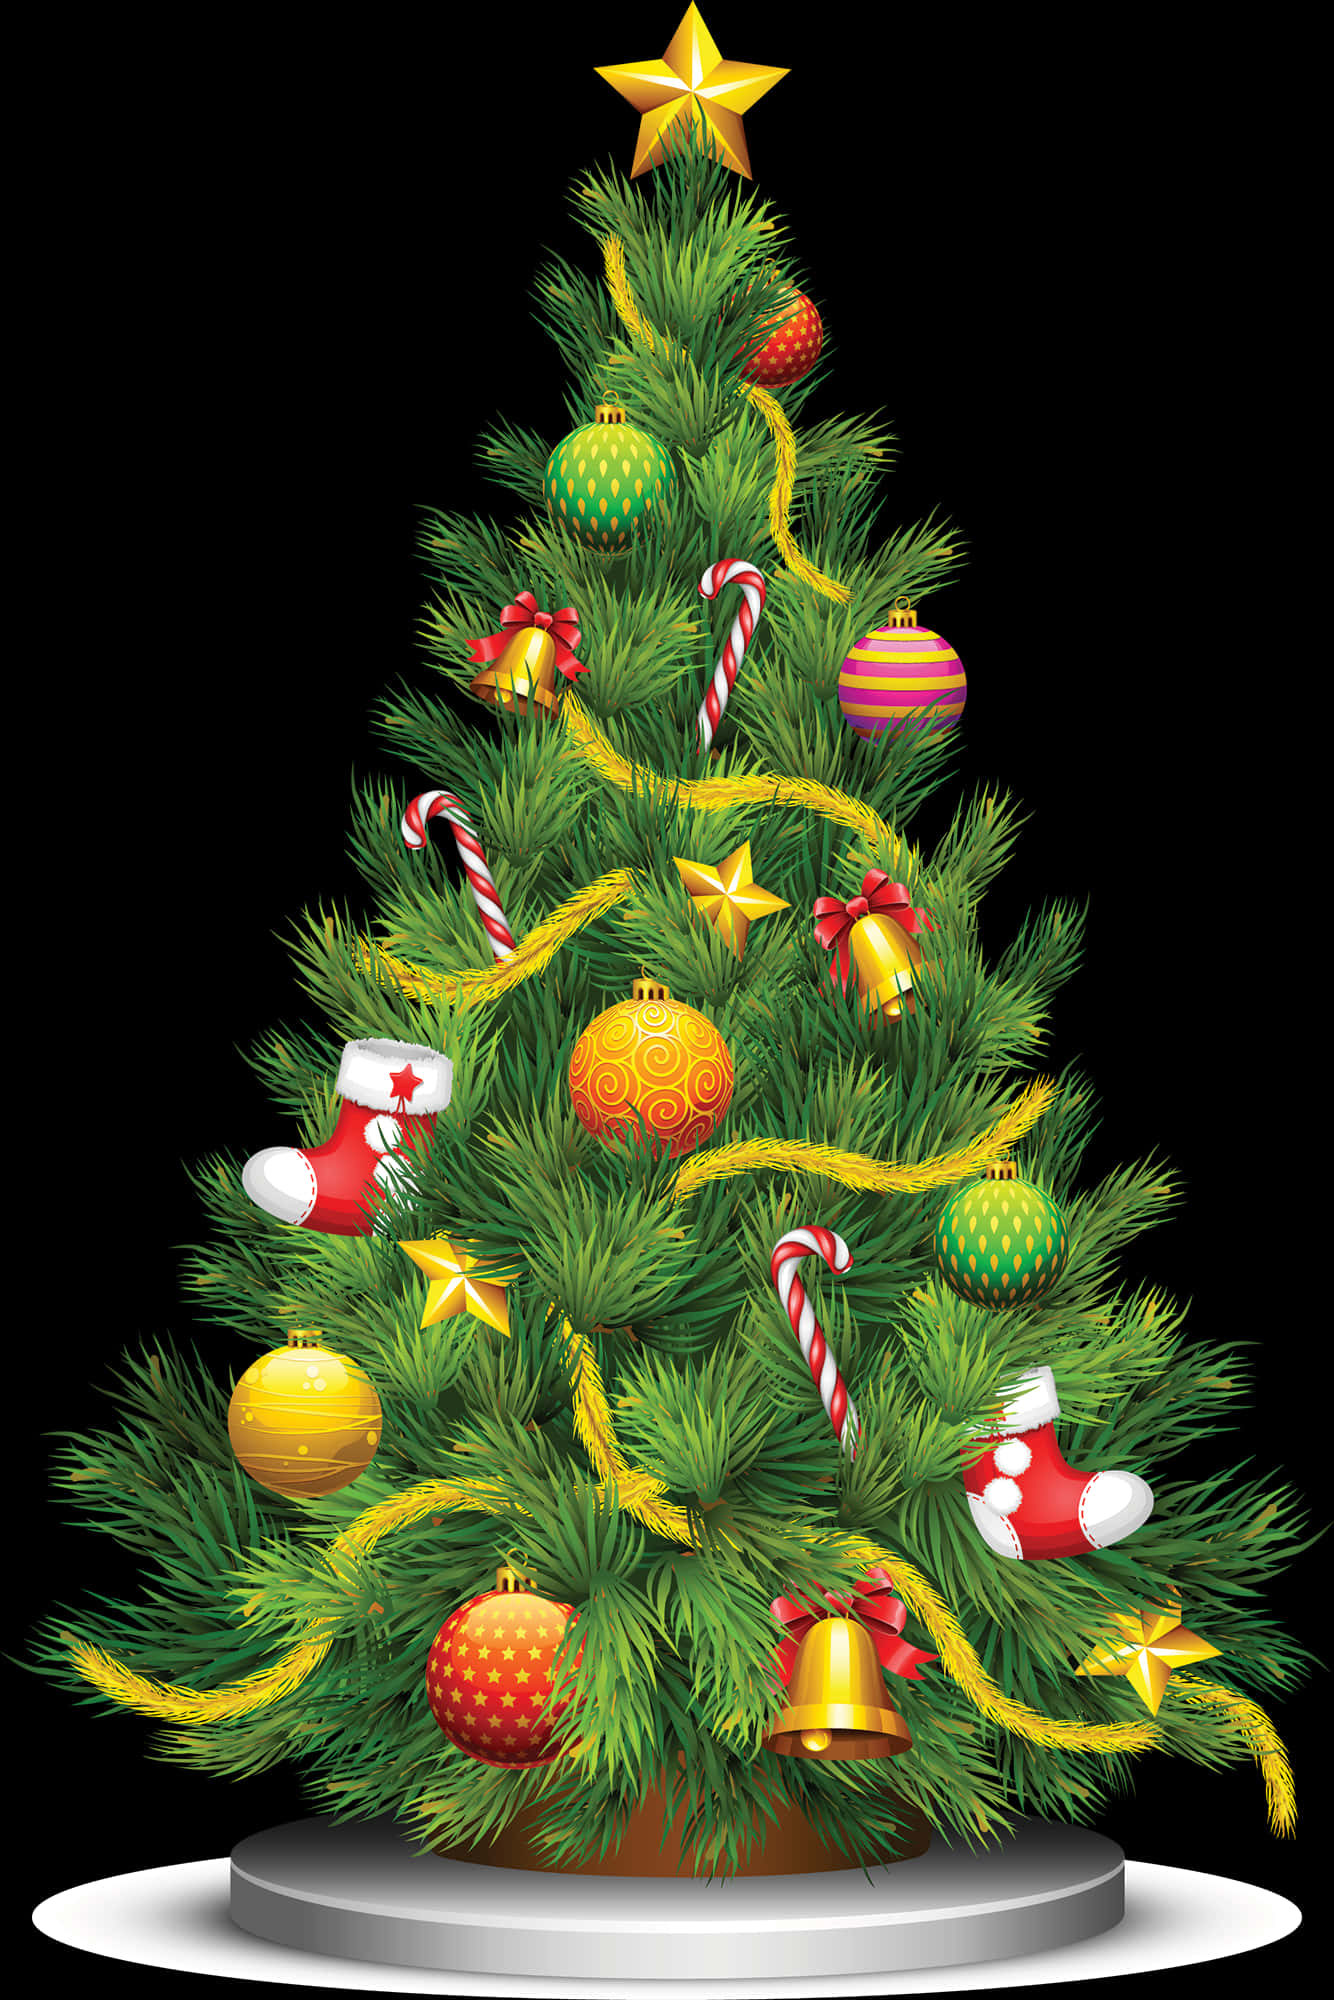 A Christmas Tree With Ornaments And Candy Canes